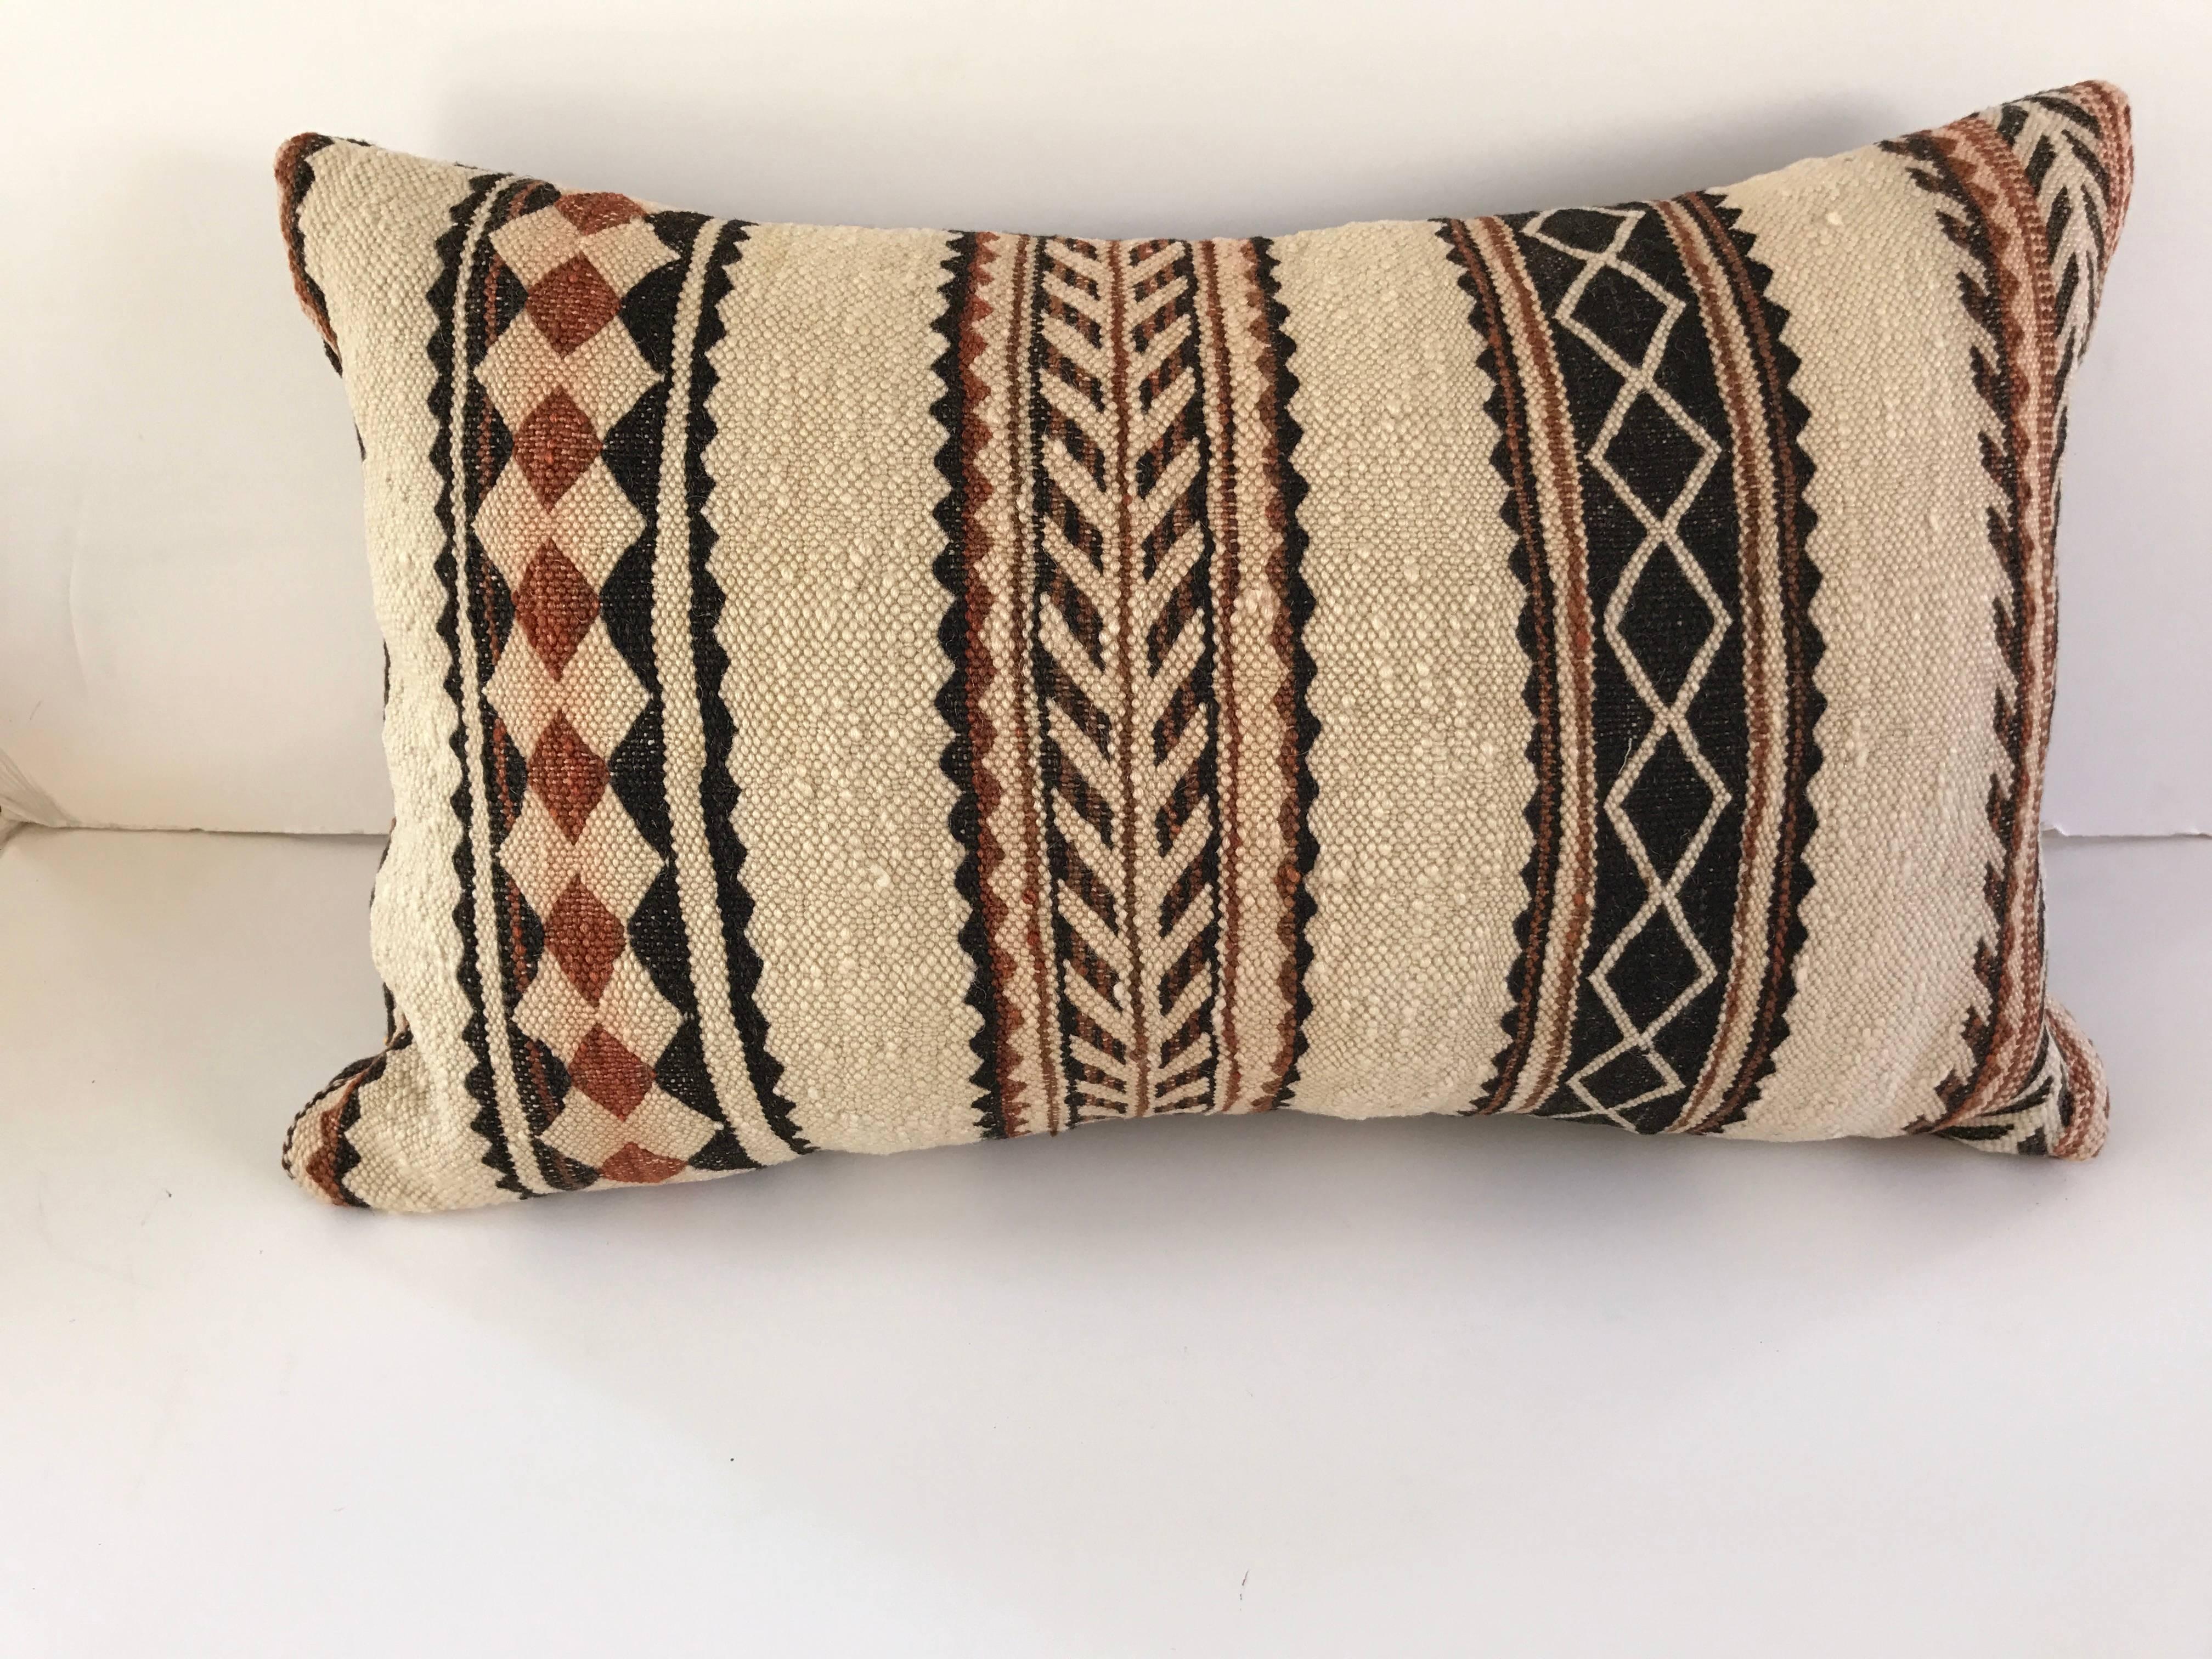 Custom pillow cut from a hand loomed wool vintage Moroccan Berber rug from the Atlas Mountains. Wool is soft and lustrous with natural color. Pillow is backed in a linen blend, filled with an insert of 100% down and hand-sewn closed. All custom